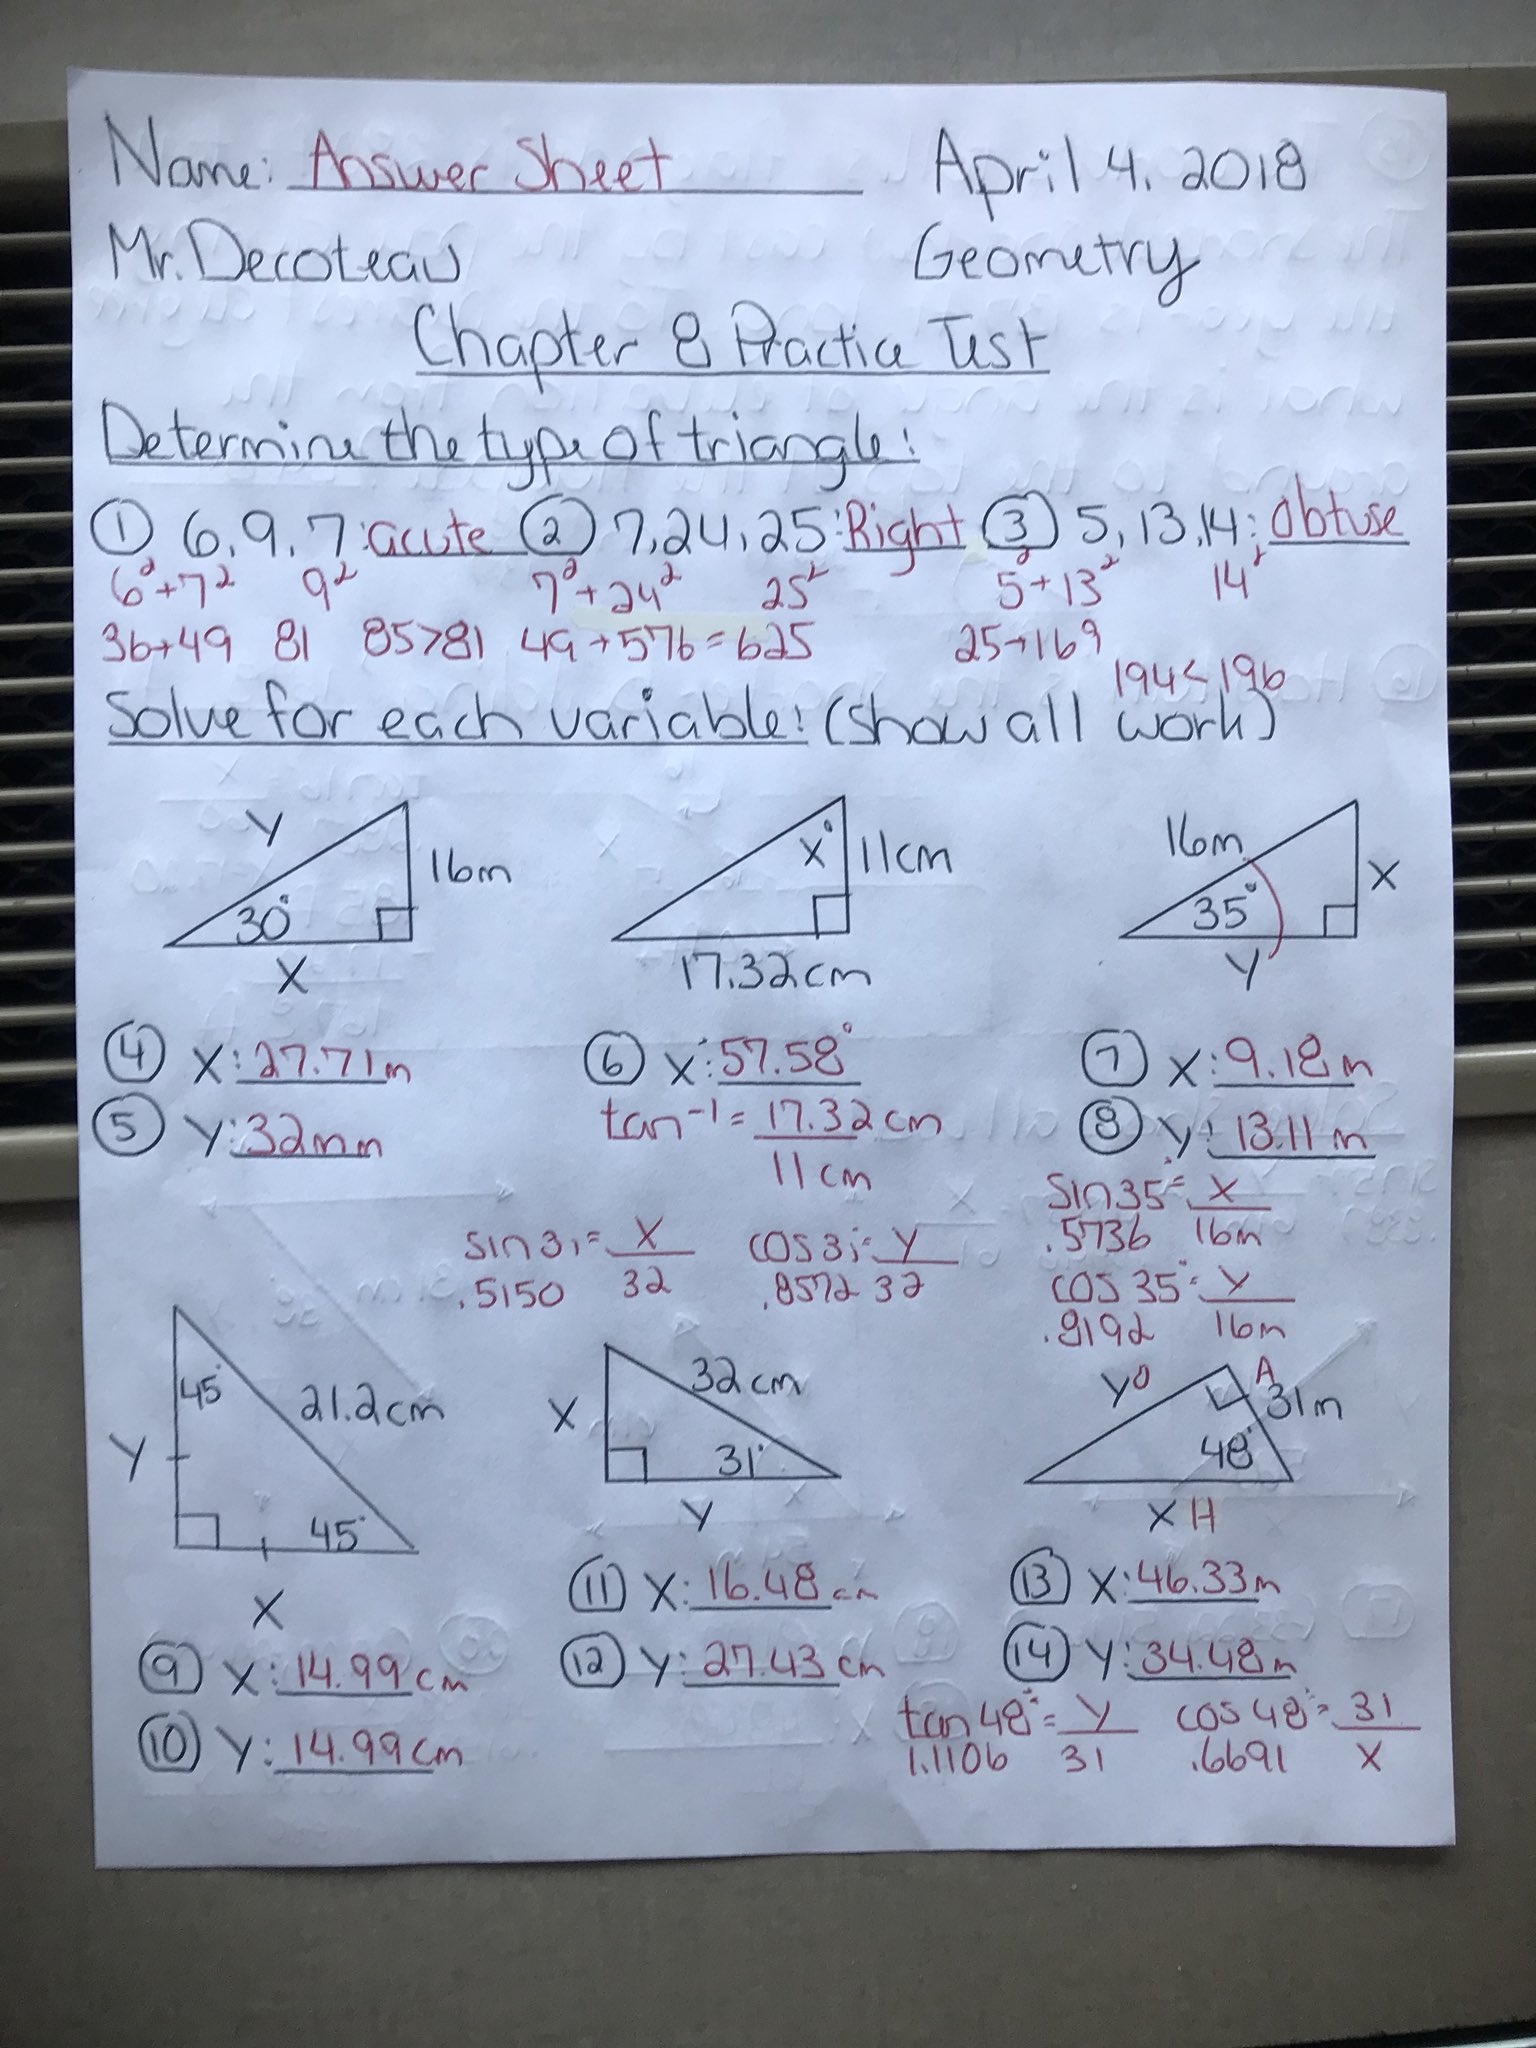 Mr Decoteau On Twitter A And G Geometry Answer Sheet To The Chapter 8 Practice Test The Test Is Scheduled For Tomorrow